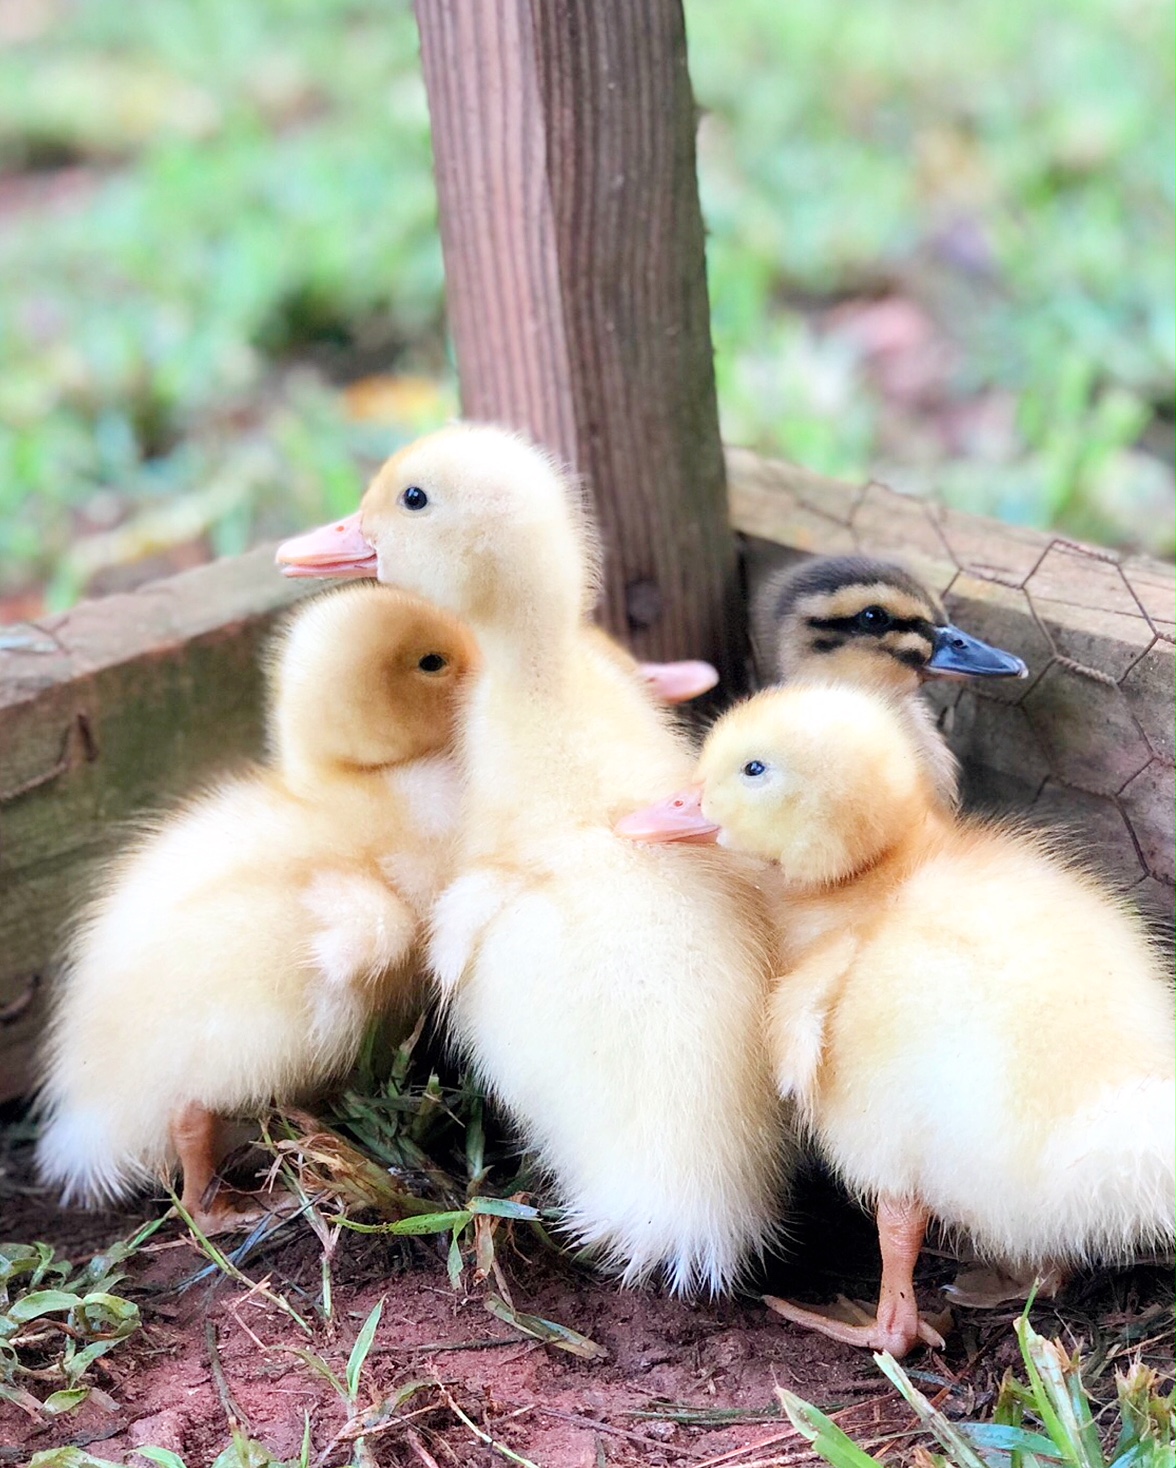 Happenings at Duke Manor Farm...new ducks, chicks and unfinished projects